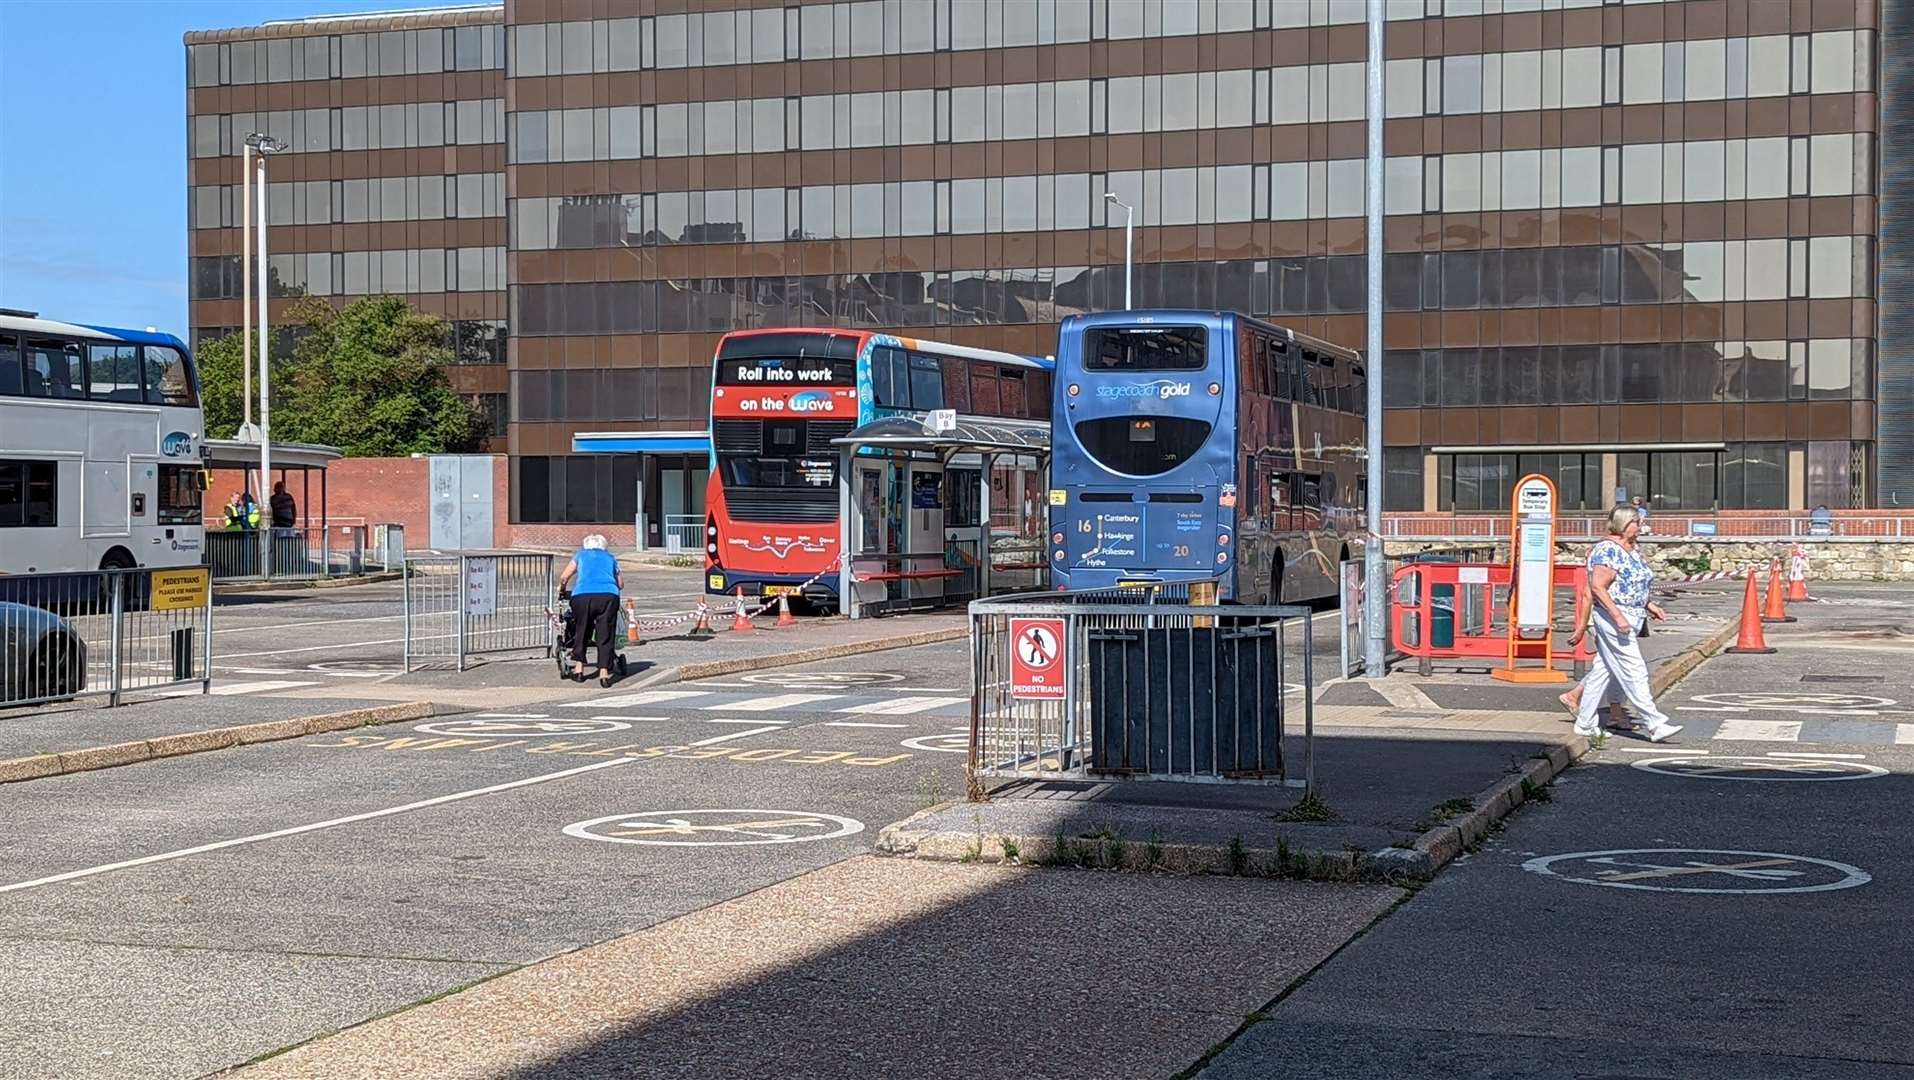 How the bus station looks today